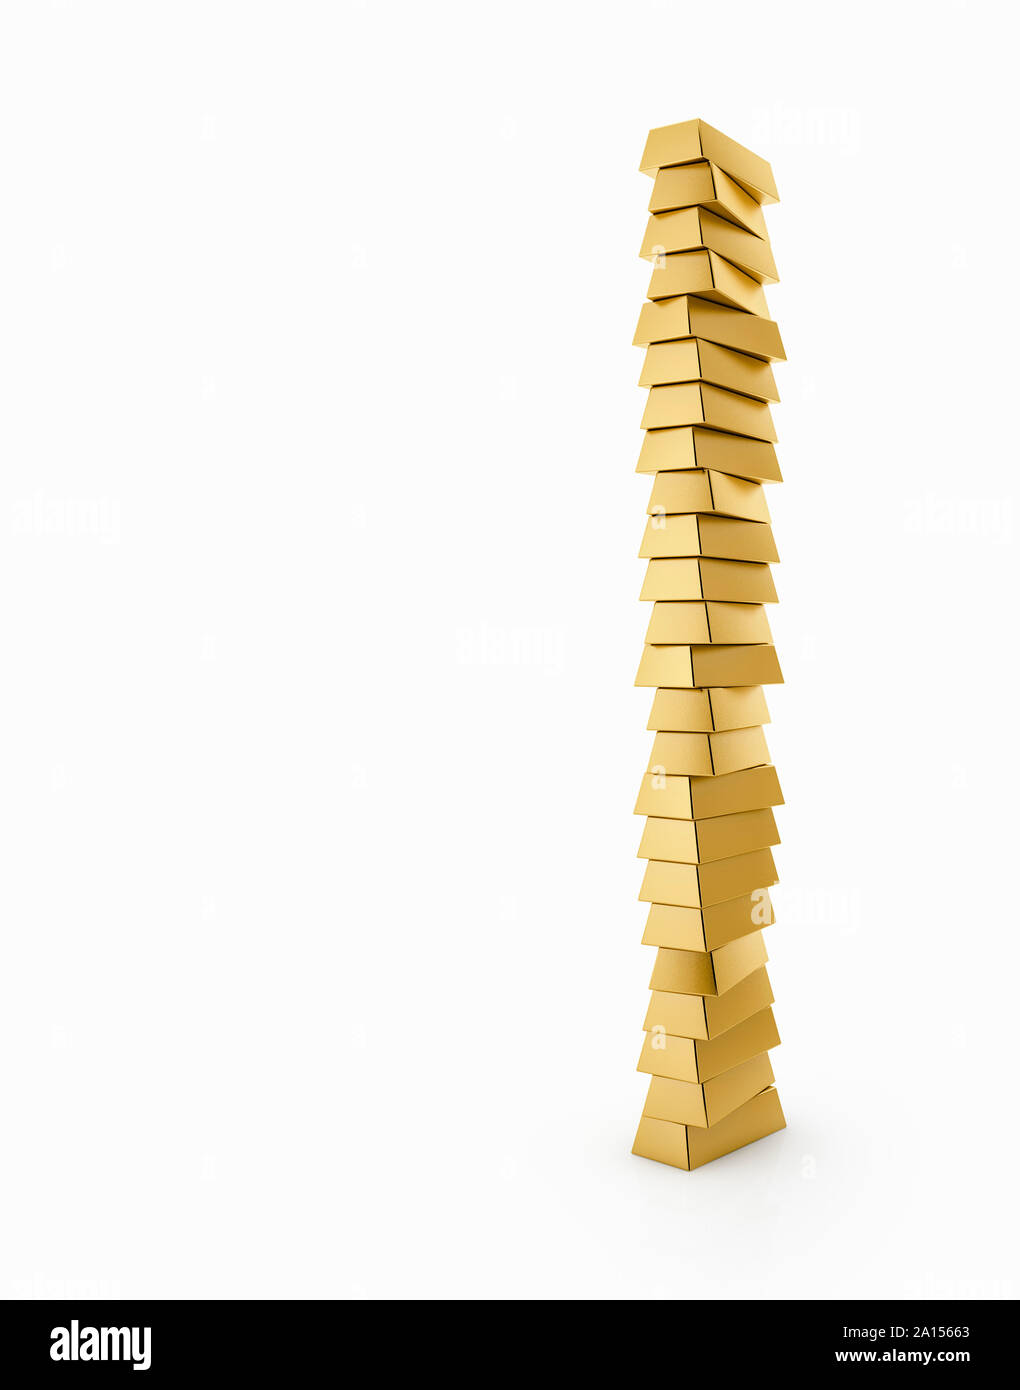 Tall stack of gold bars ingots on a white background Stock Photo